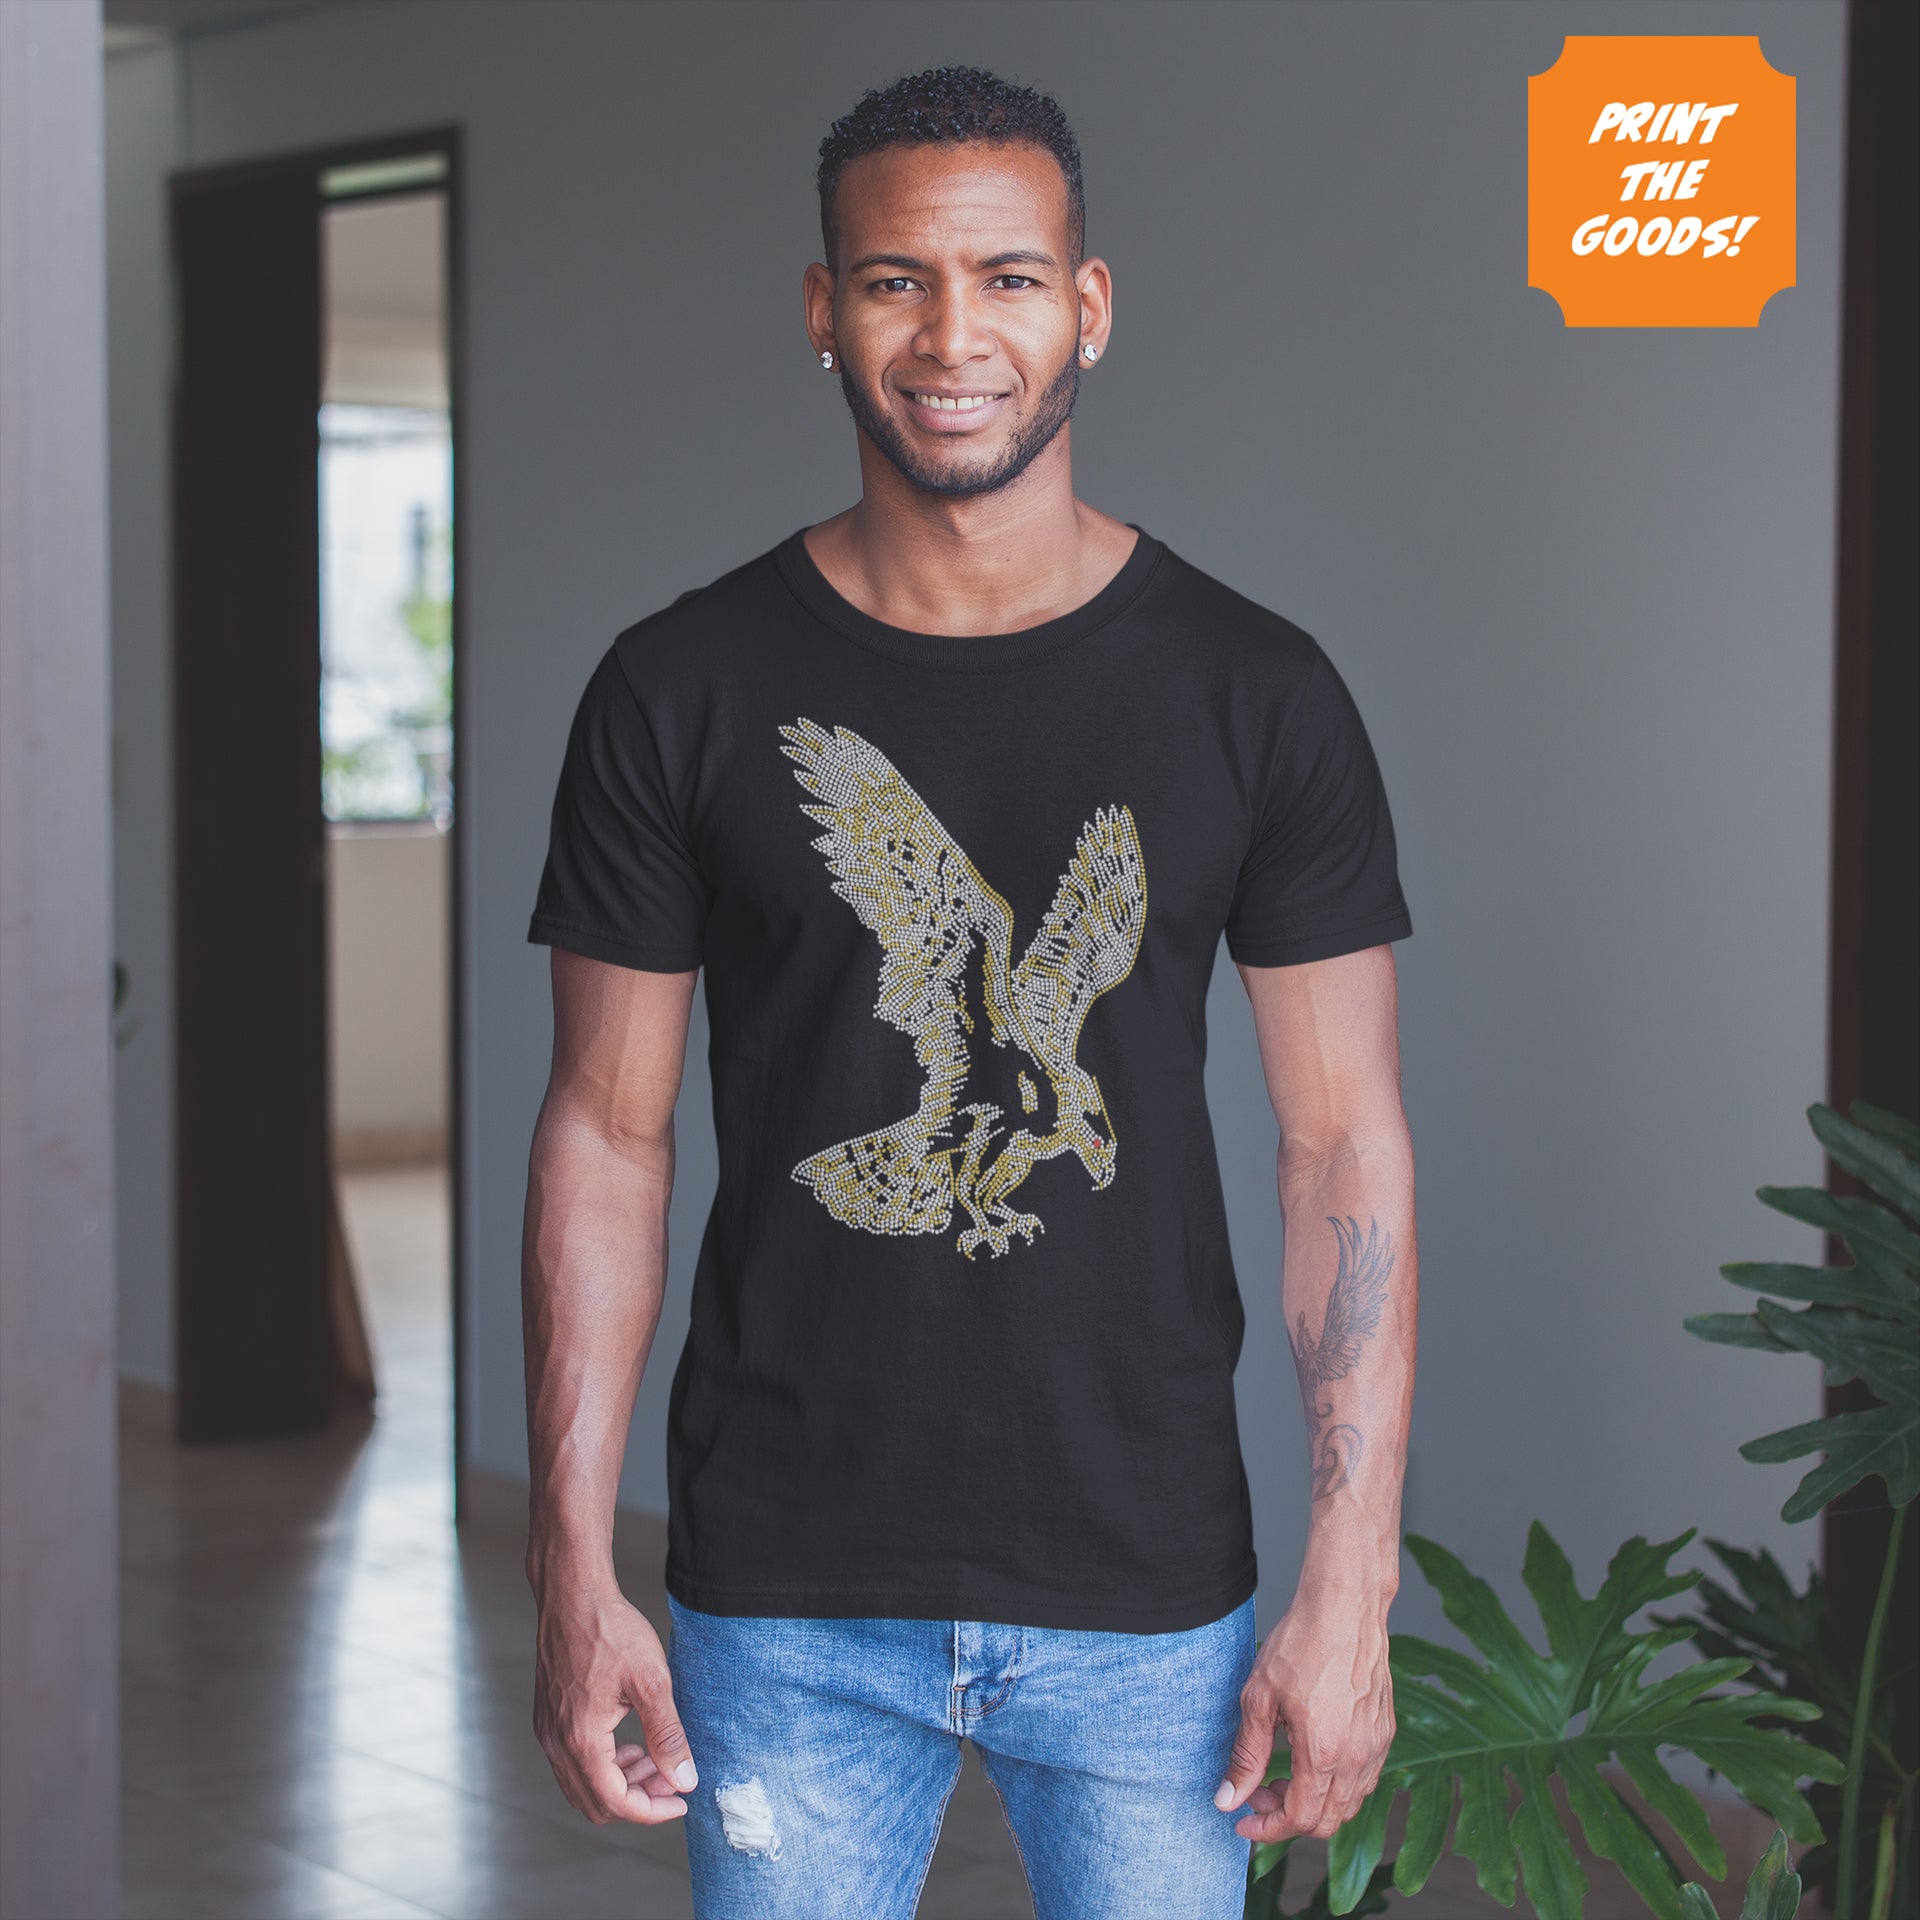 Black Eagle Fitted Diamante T-Shirt - Print the Goods